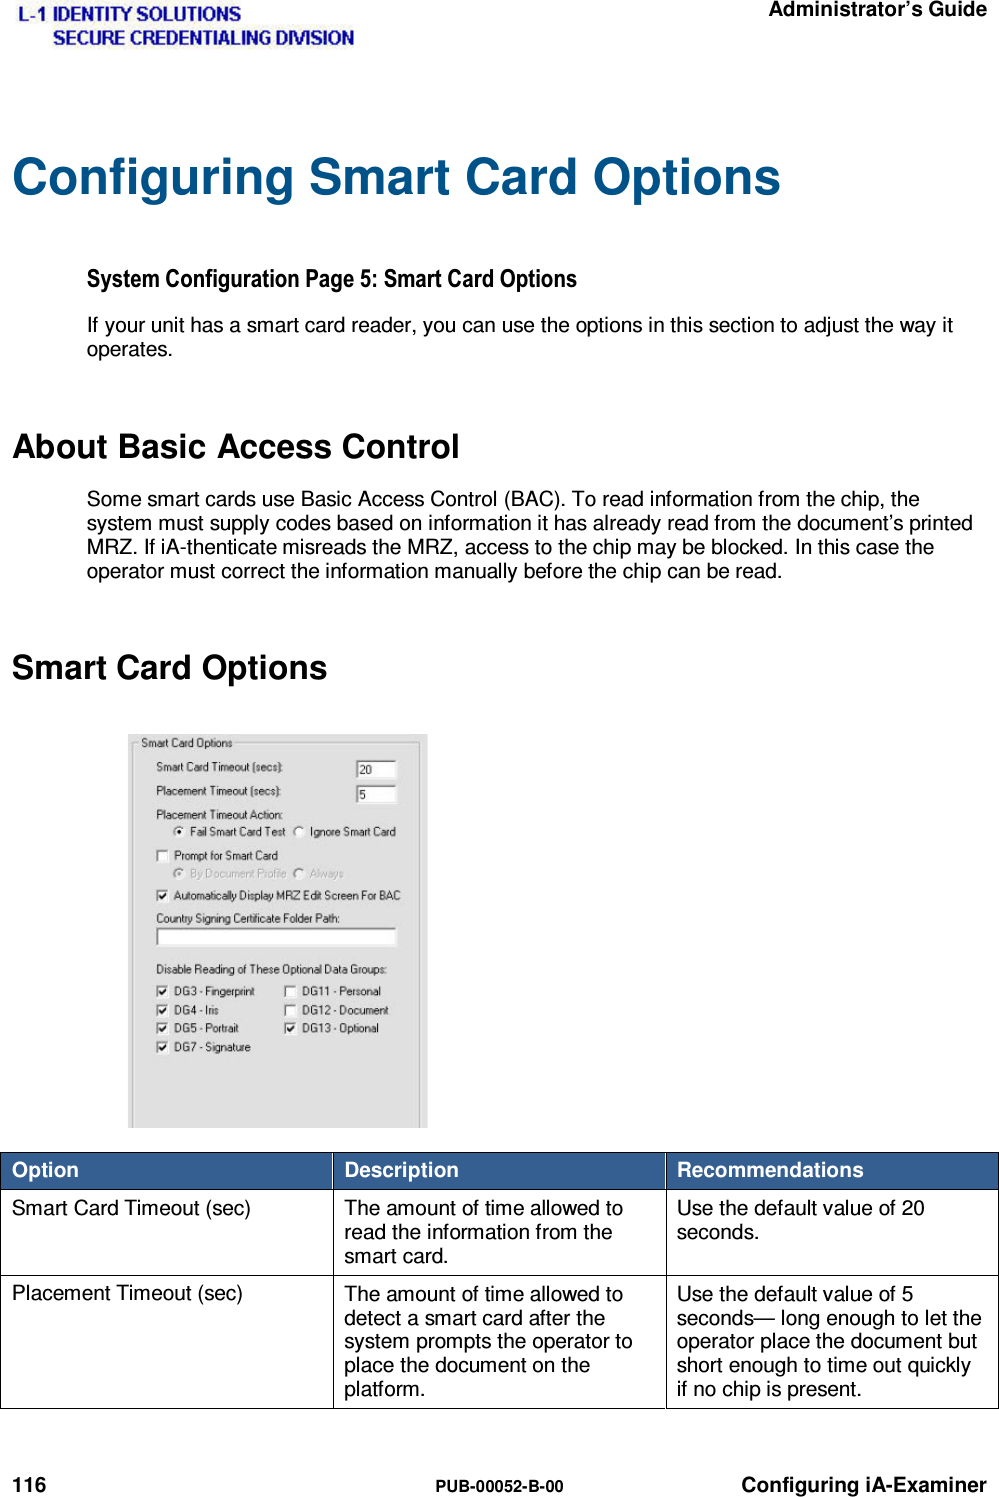   Administrator’s Guide 116  PUB-00052-B-00 Configuring iA-Examiner Configuring Smart Card Options 6\VWHP&amp;RQILJXUDWLRQ3DJH6PDUW&amp;DUG2SWLRQVIf your unit has a smart card reader, you can use the options in this section to adjust the way it operates. About Basic Access Control Some smart cards use Basic Access Control (BAC). To read information from the chip, the system must supply codes based on information it has already read from the document’s printed MRZ. If iA-thenticate misreads the MRZ, access to the chip may be blocked. In this case the operator must correct the information manually before the chip can be read. Smart Card Options Option  Description  Recommendations Smart Card Timeout (sec)  The amount of time allowed to read the information from the smart card. Use the default value of 20 seconds. Placement Timeout (sec)  The amount of time allowed to detect a smart card after the system prompts the operator to place the document on the platform. Use the default value of 5 seconds— long enough to let the operator place the document but short enough to time out quickly if no chip is present. 